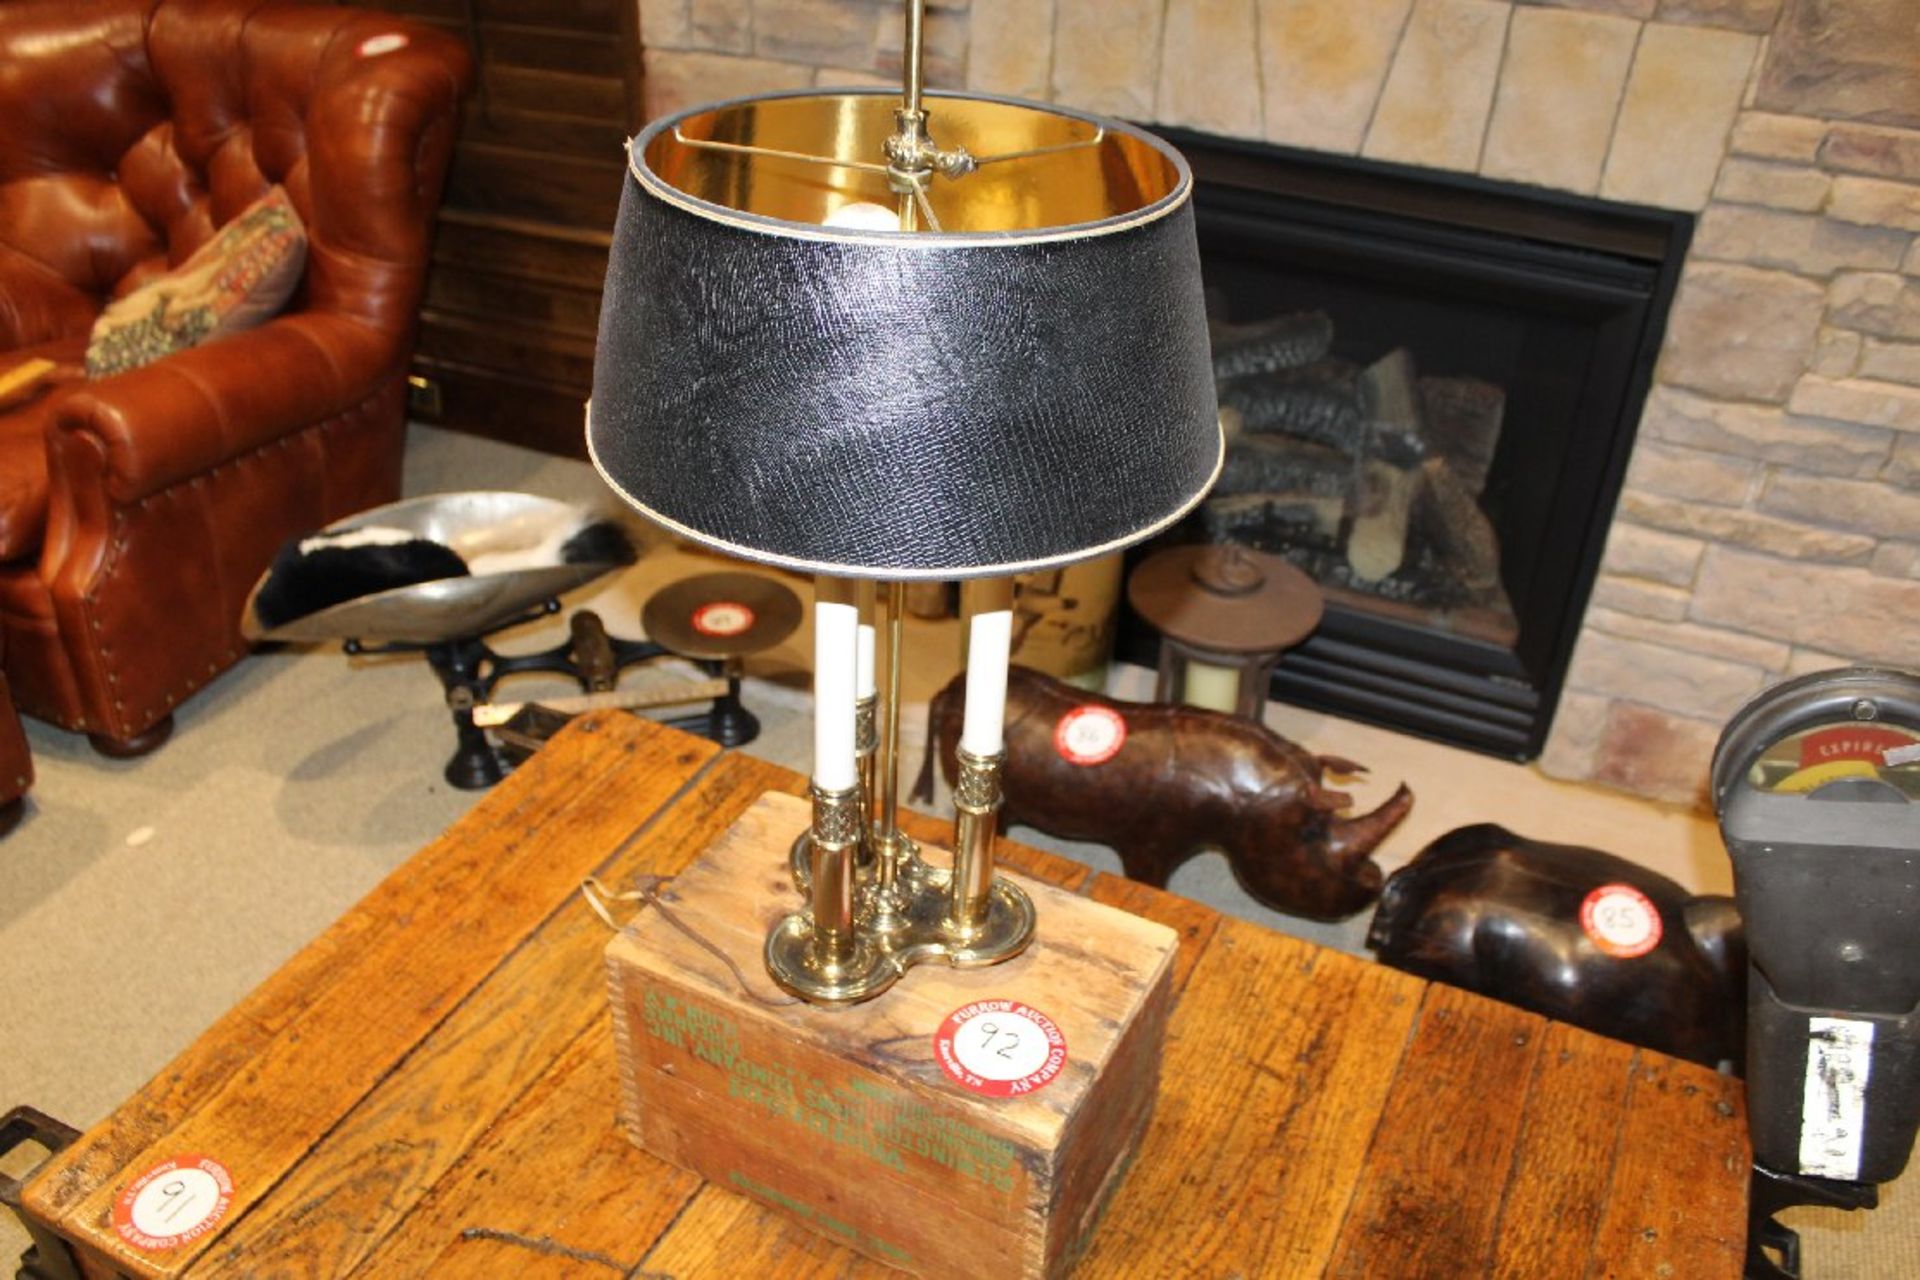 Brass 3 Light Table Lamp with Black Shade & Wooden Box Platform - Image 3 of 3